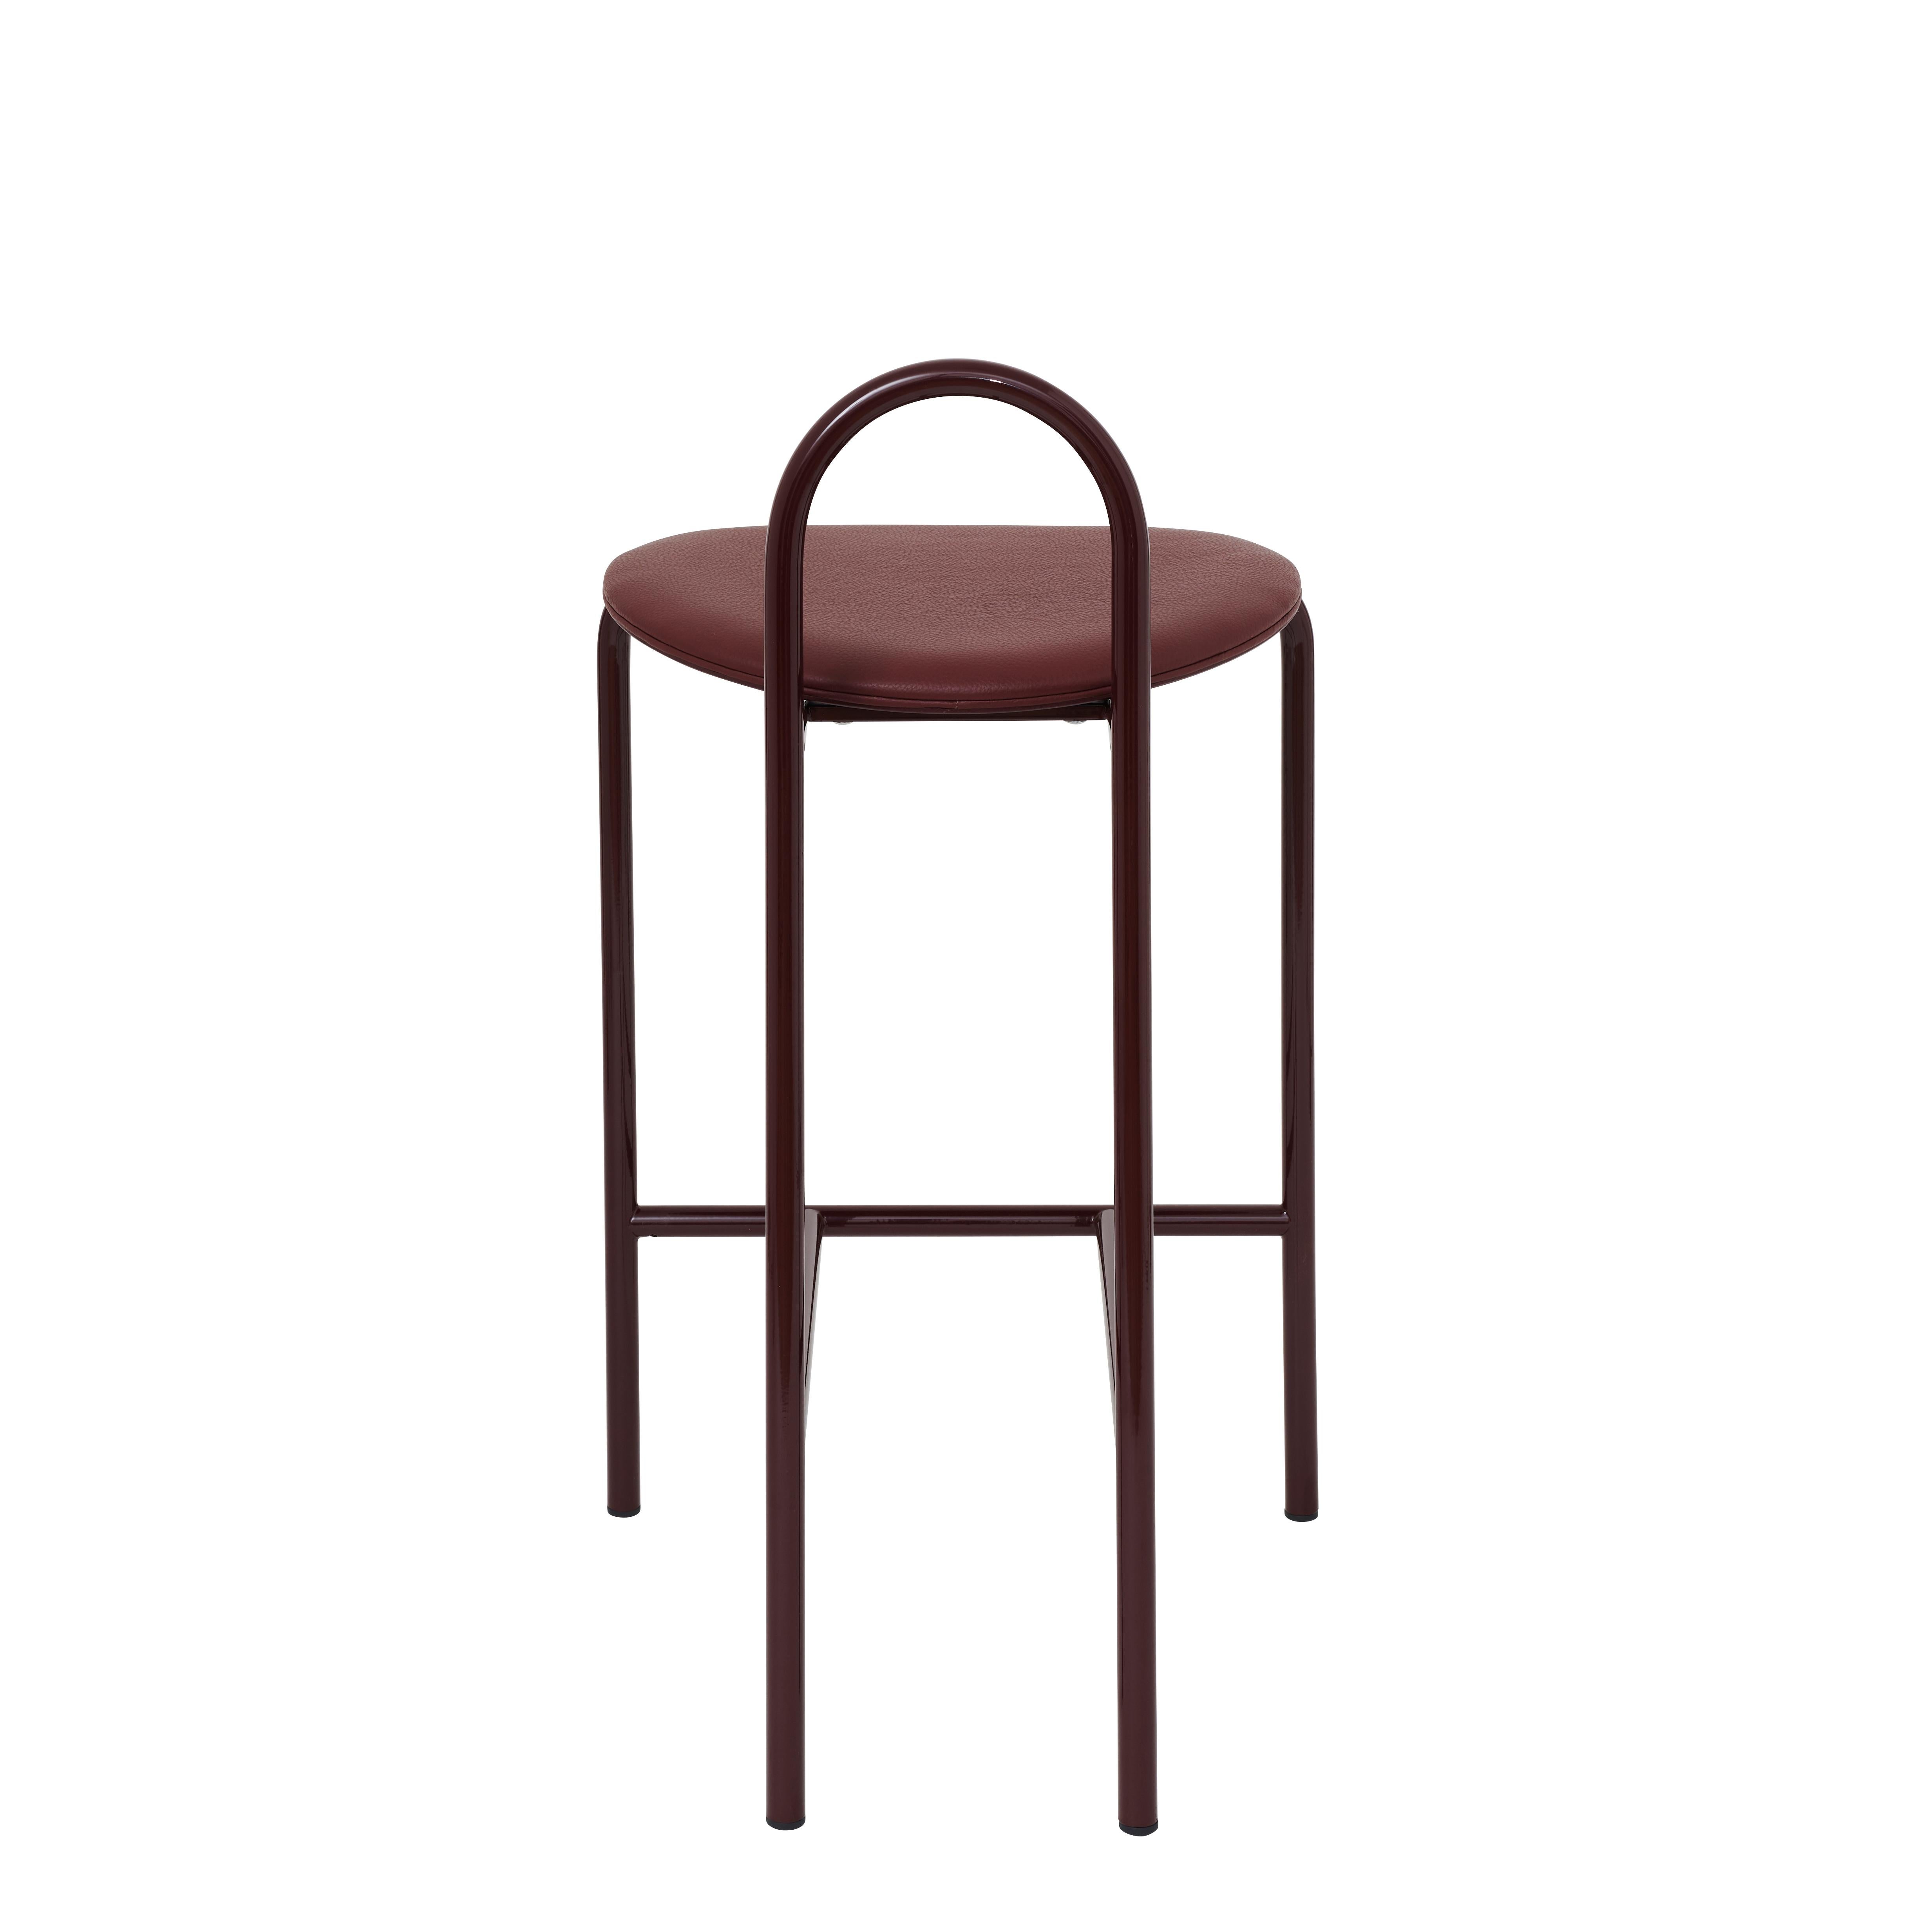 Minimalist SP01 Michelle Low Bar Stool in Edinburgh Oxblood Leather, Made in Italy For Sale